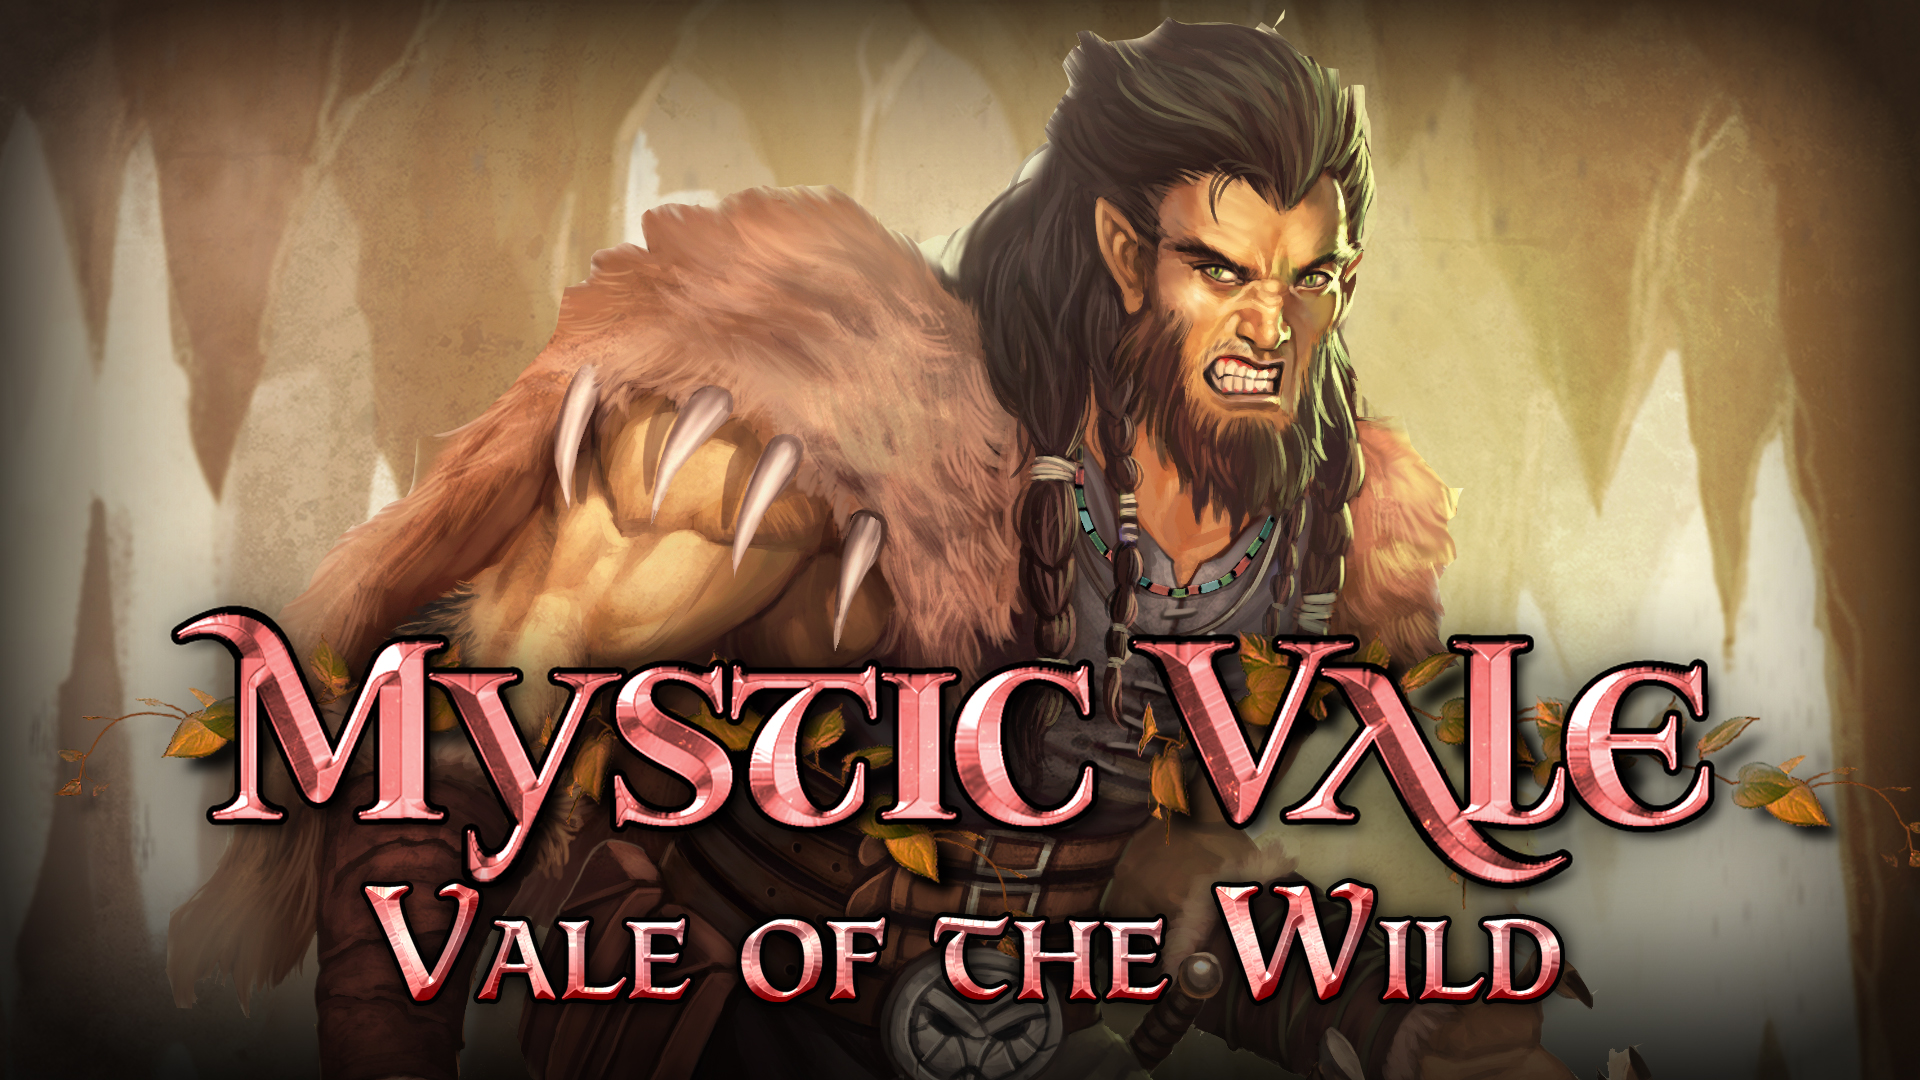 Mystic Vale - Vale of the Wild Featured Screenshot #1